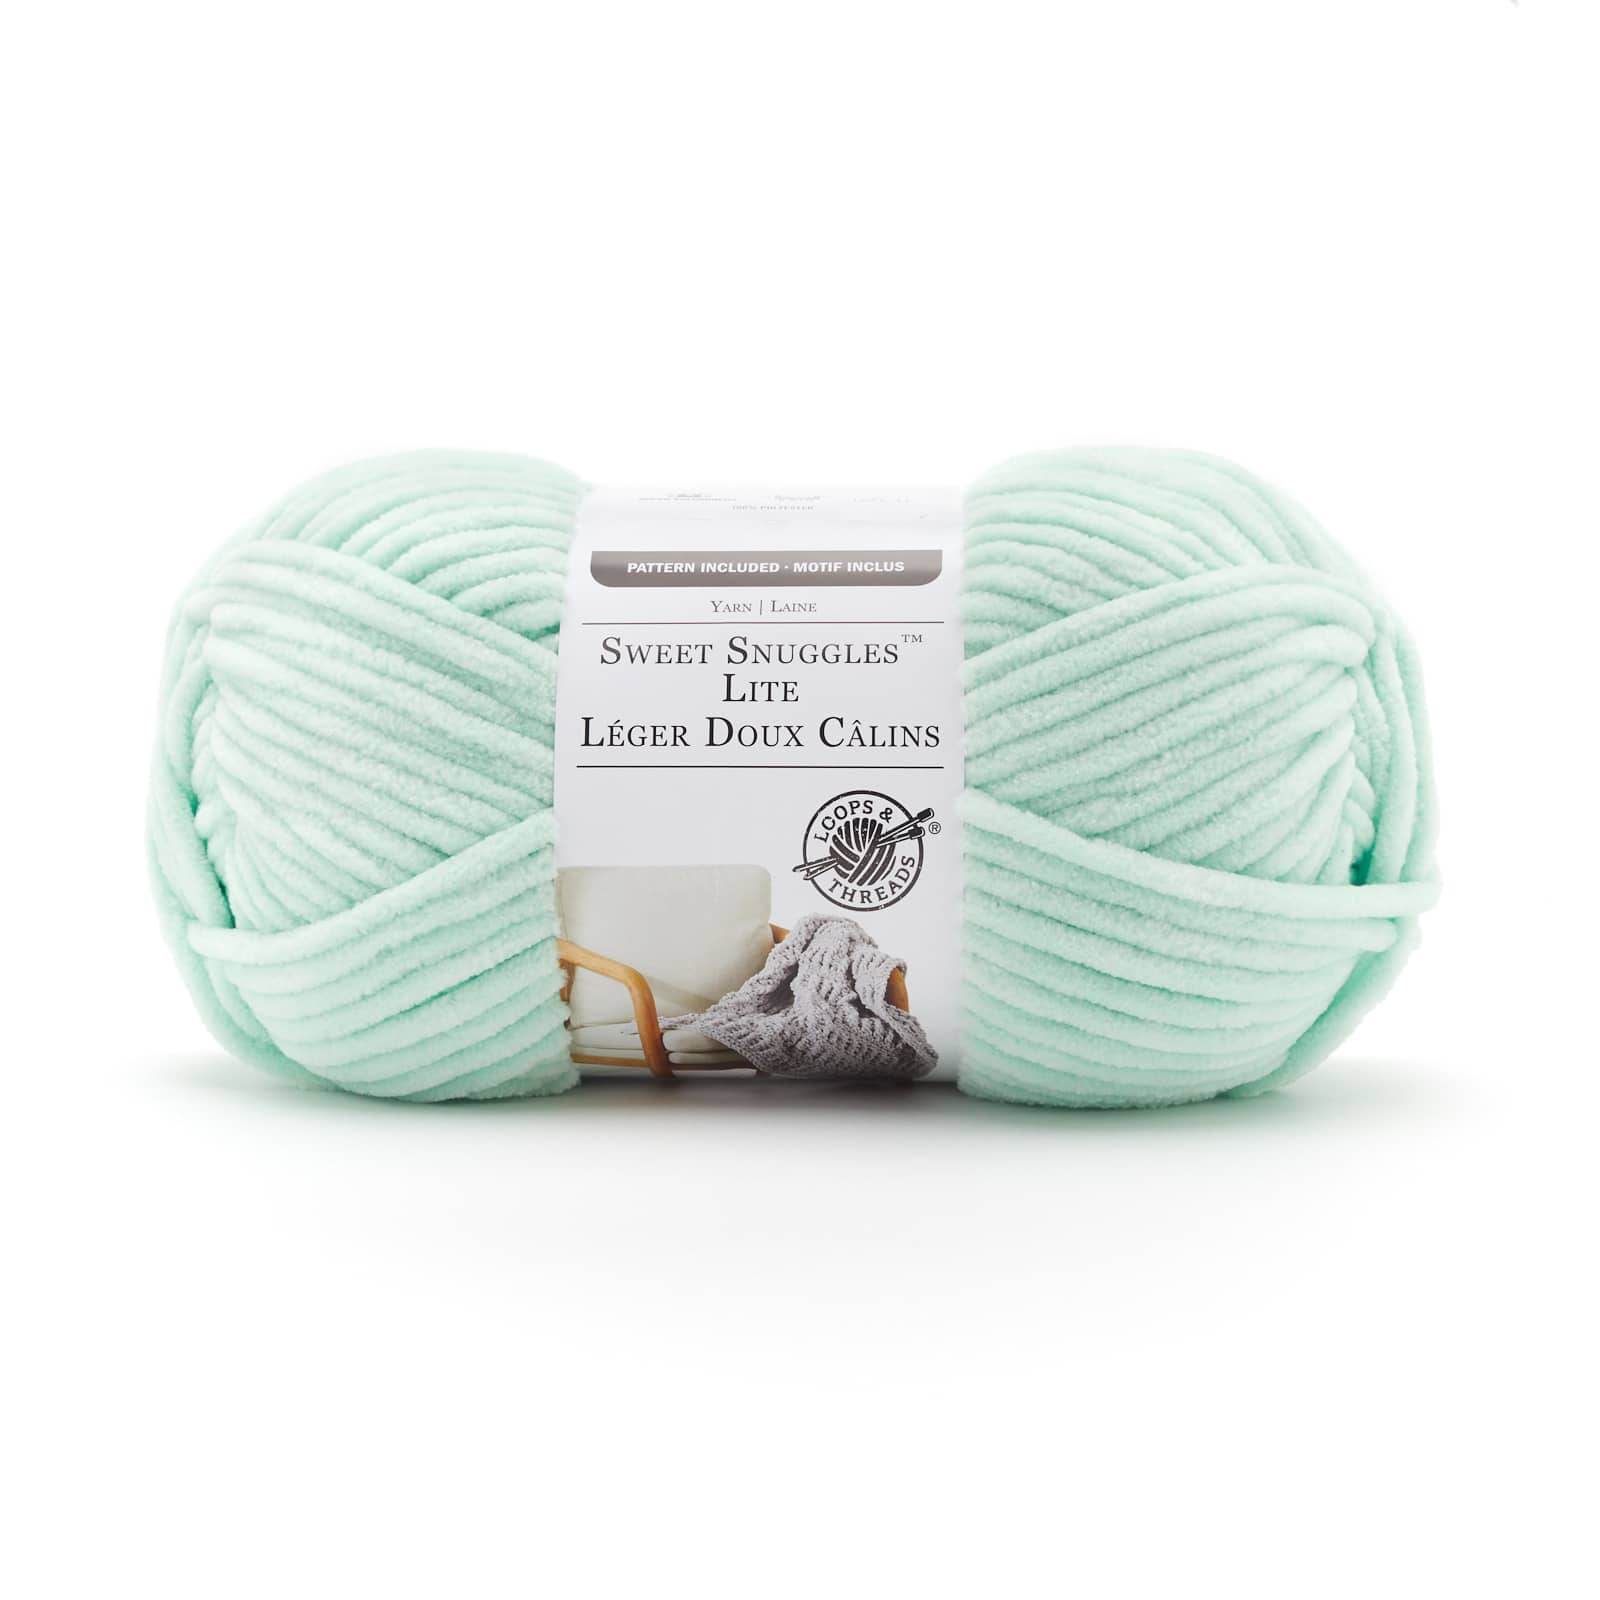 Sweet Snuggles Yarn- Does anyone have this in stock in their local stores?  Need a few more bundles for blanket. Thanks! : r/crochet